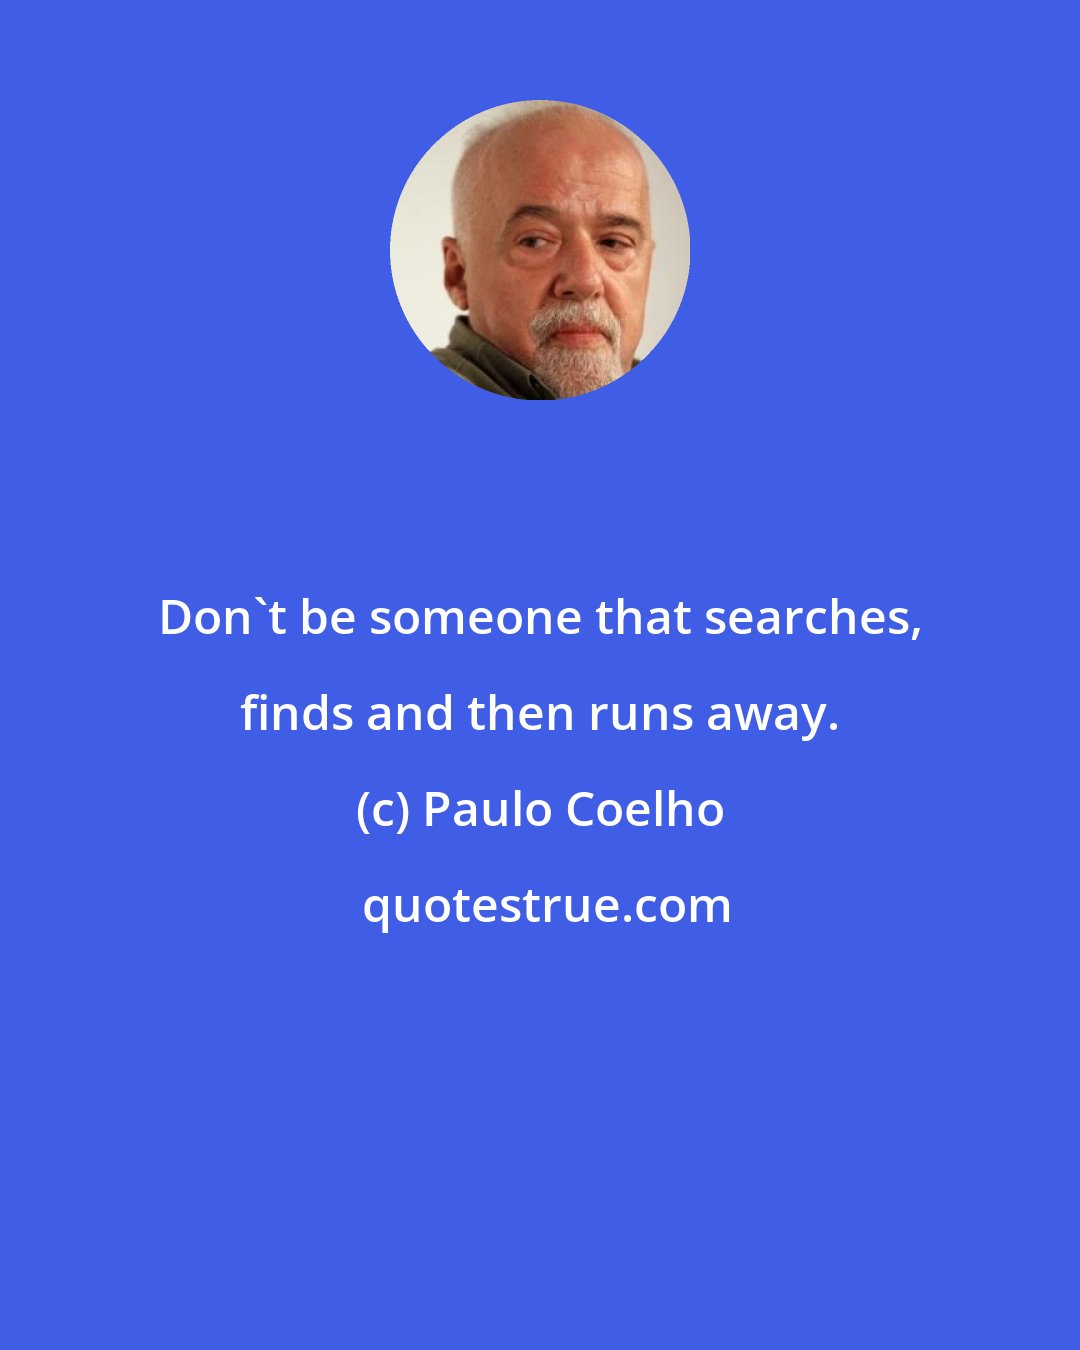 Paulo Coelho: Don't be someone that searches, finds and then runs away.